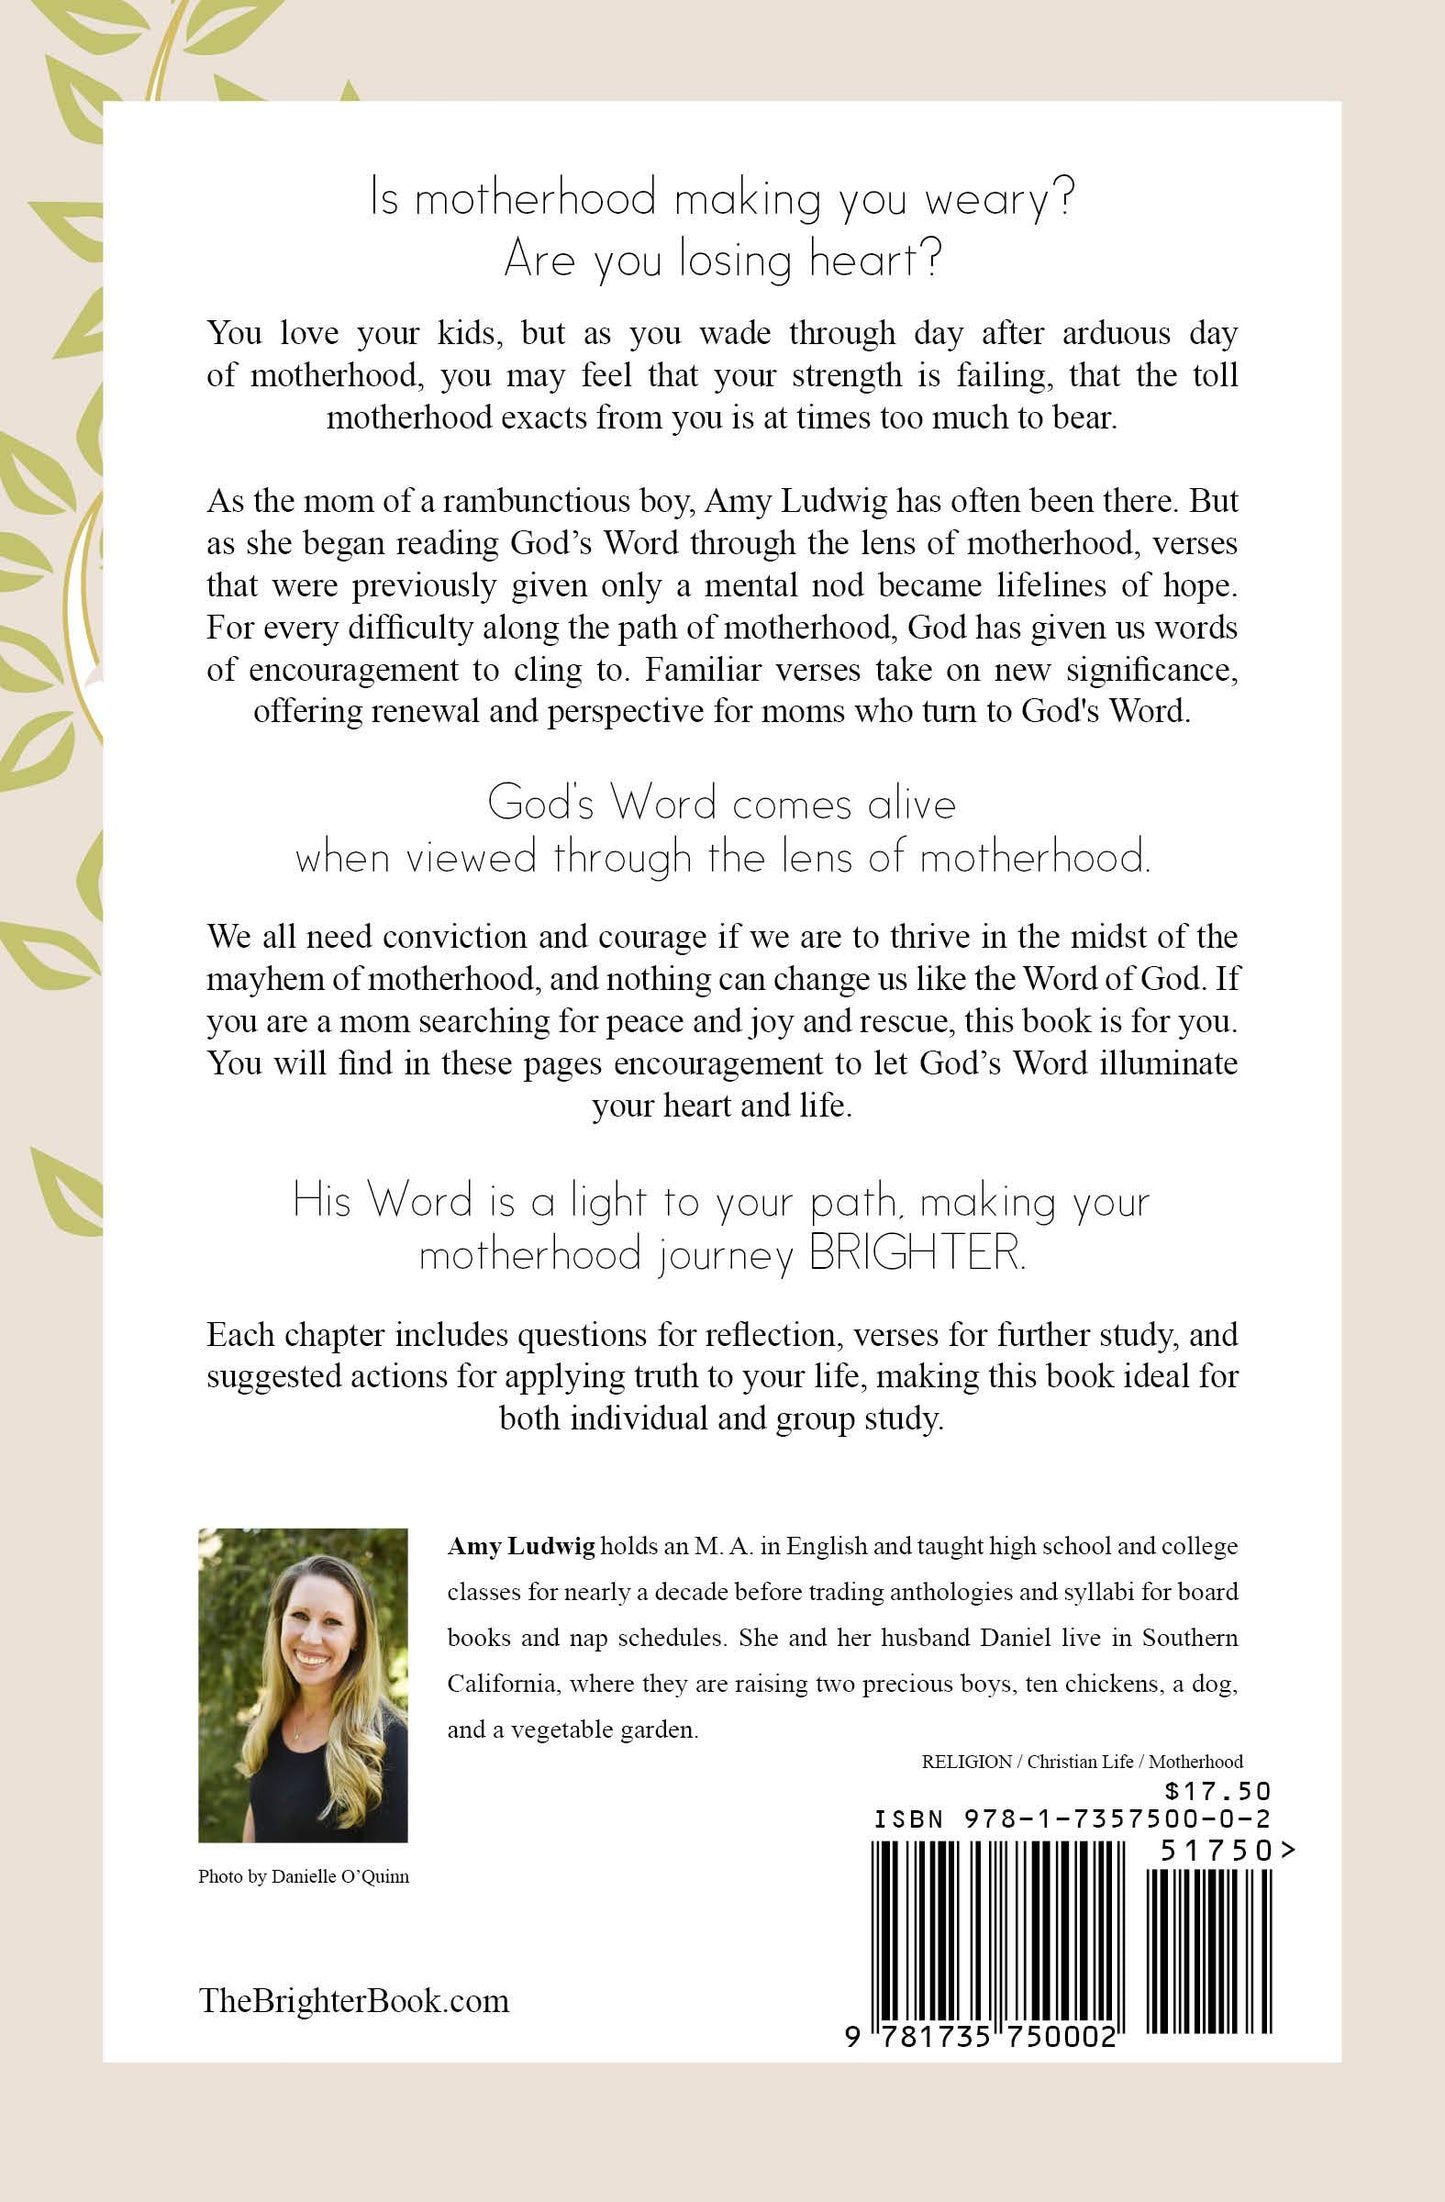 Brighter: When God's Word Illuminates A Mother's Heart